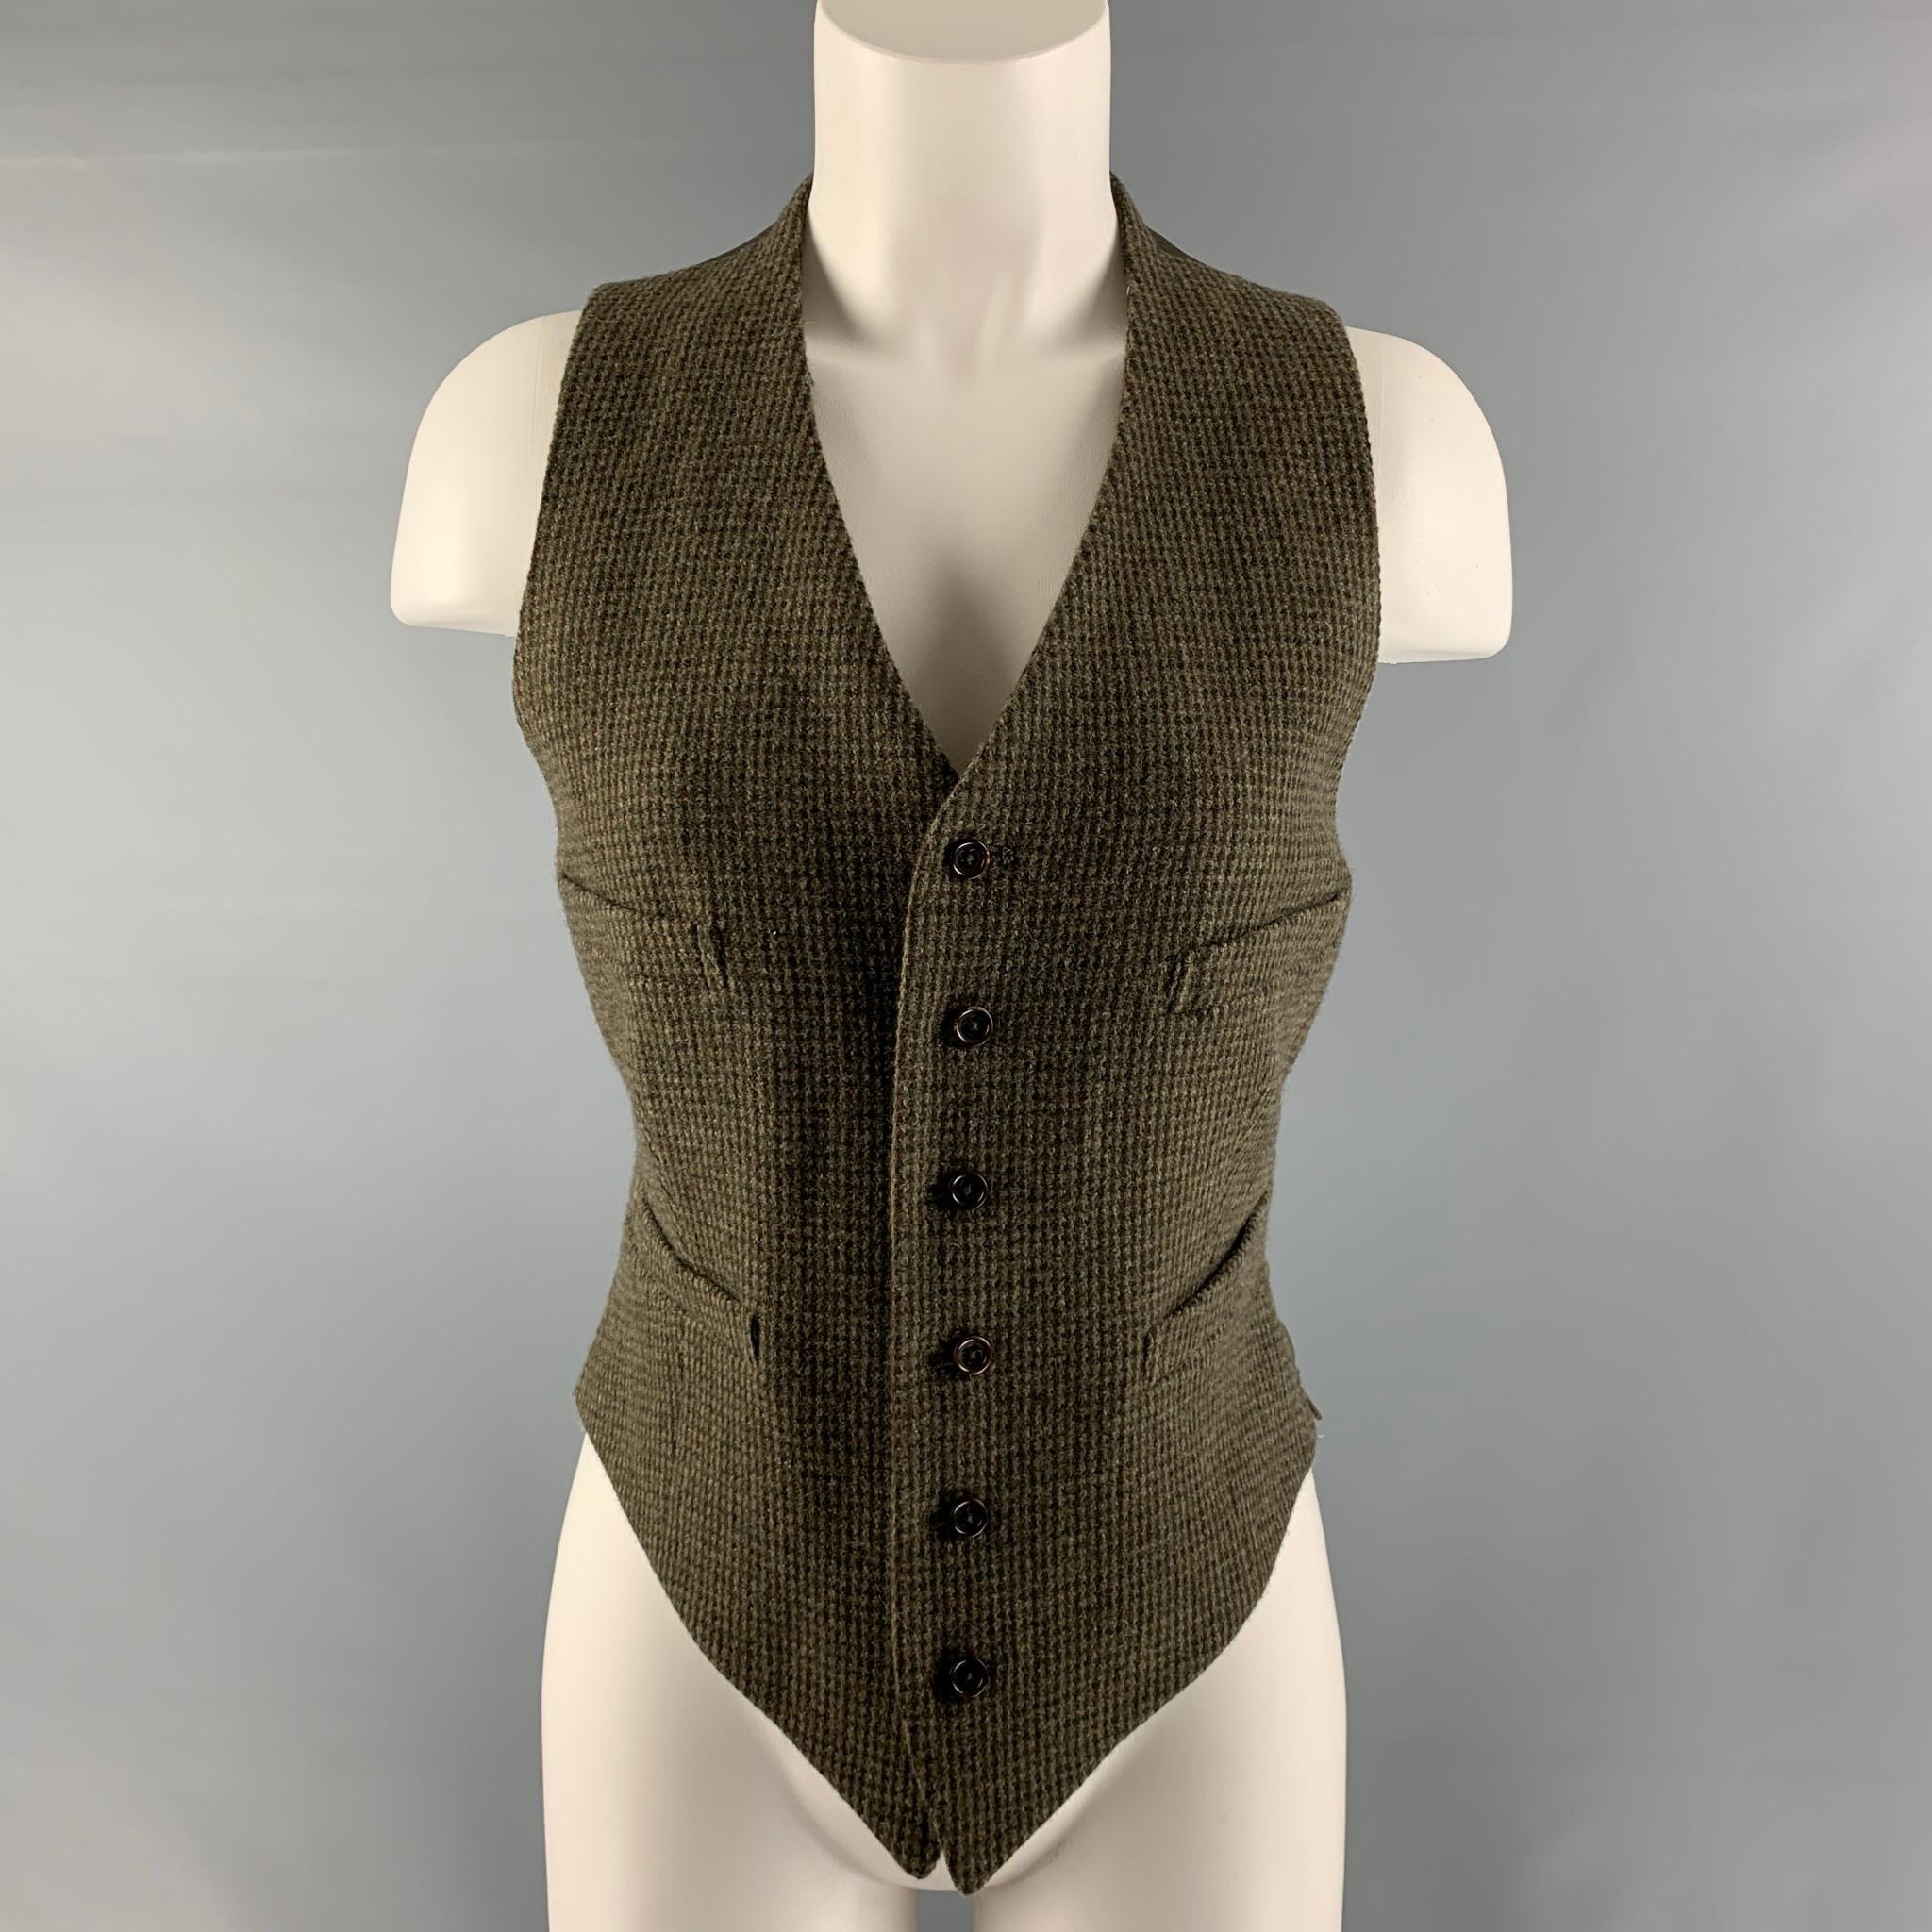 RALPH LAUREN COLLECTION Fall 2016 vest comes in an olive and taupe wool and silk featuring four faux pockets, back belt, and a buttoned closure. Made in USA.

Excellent Pre-Owned Condition.
Marked: 8

Measurements:

Shoulder: 11 in.
Chest: 36